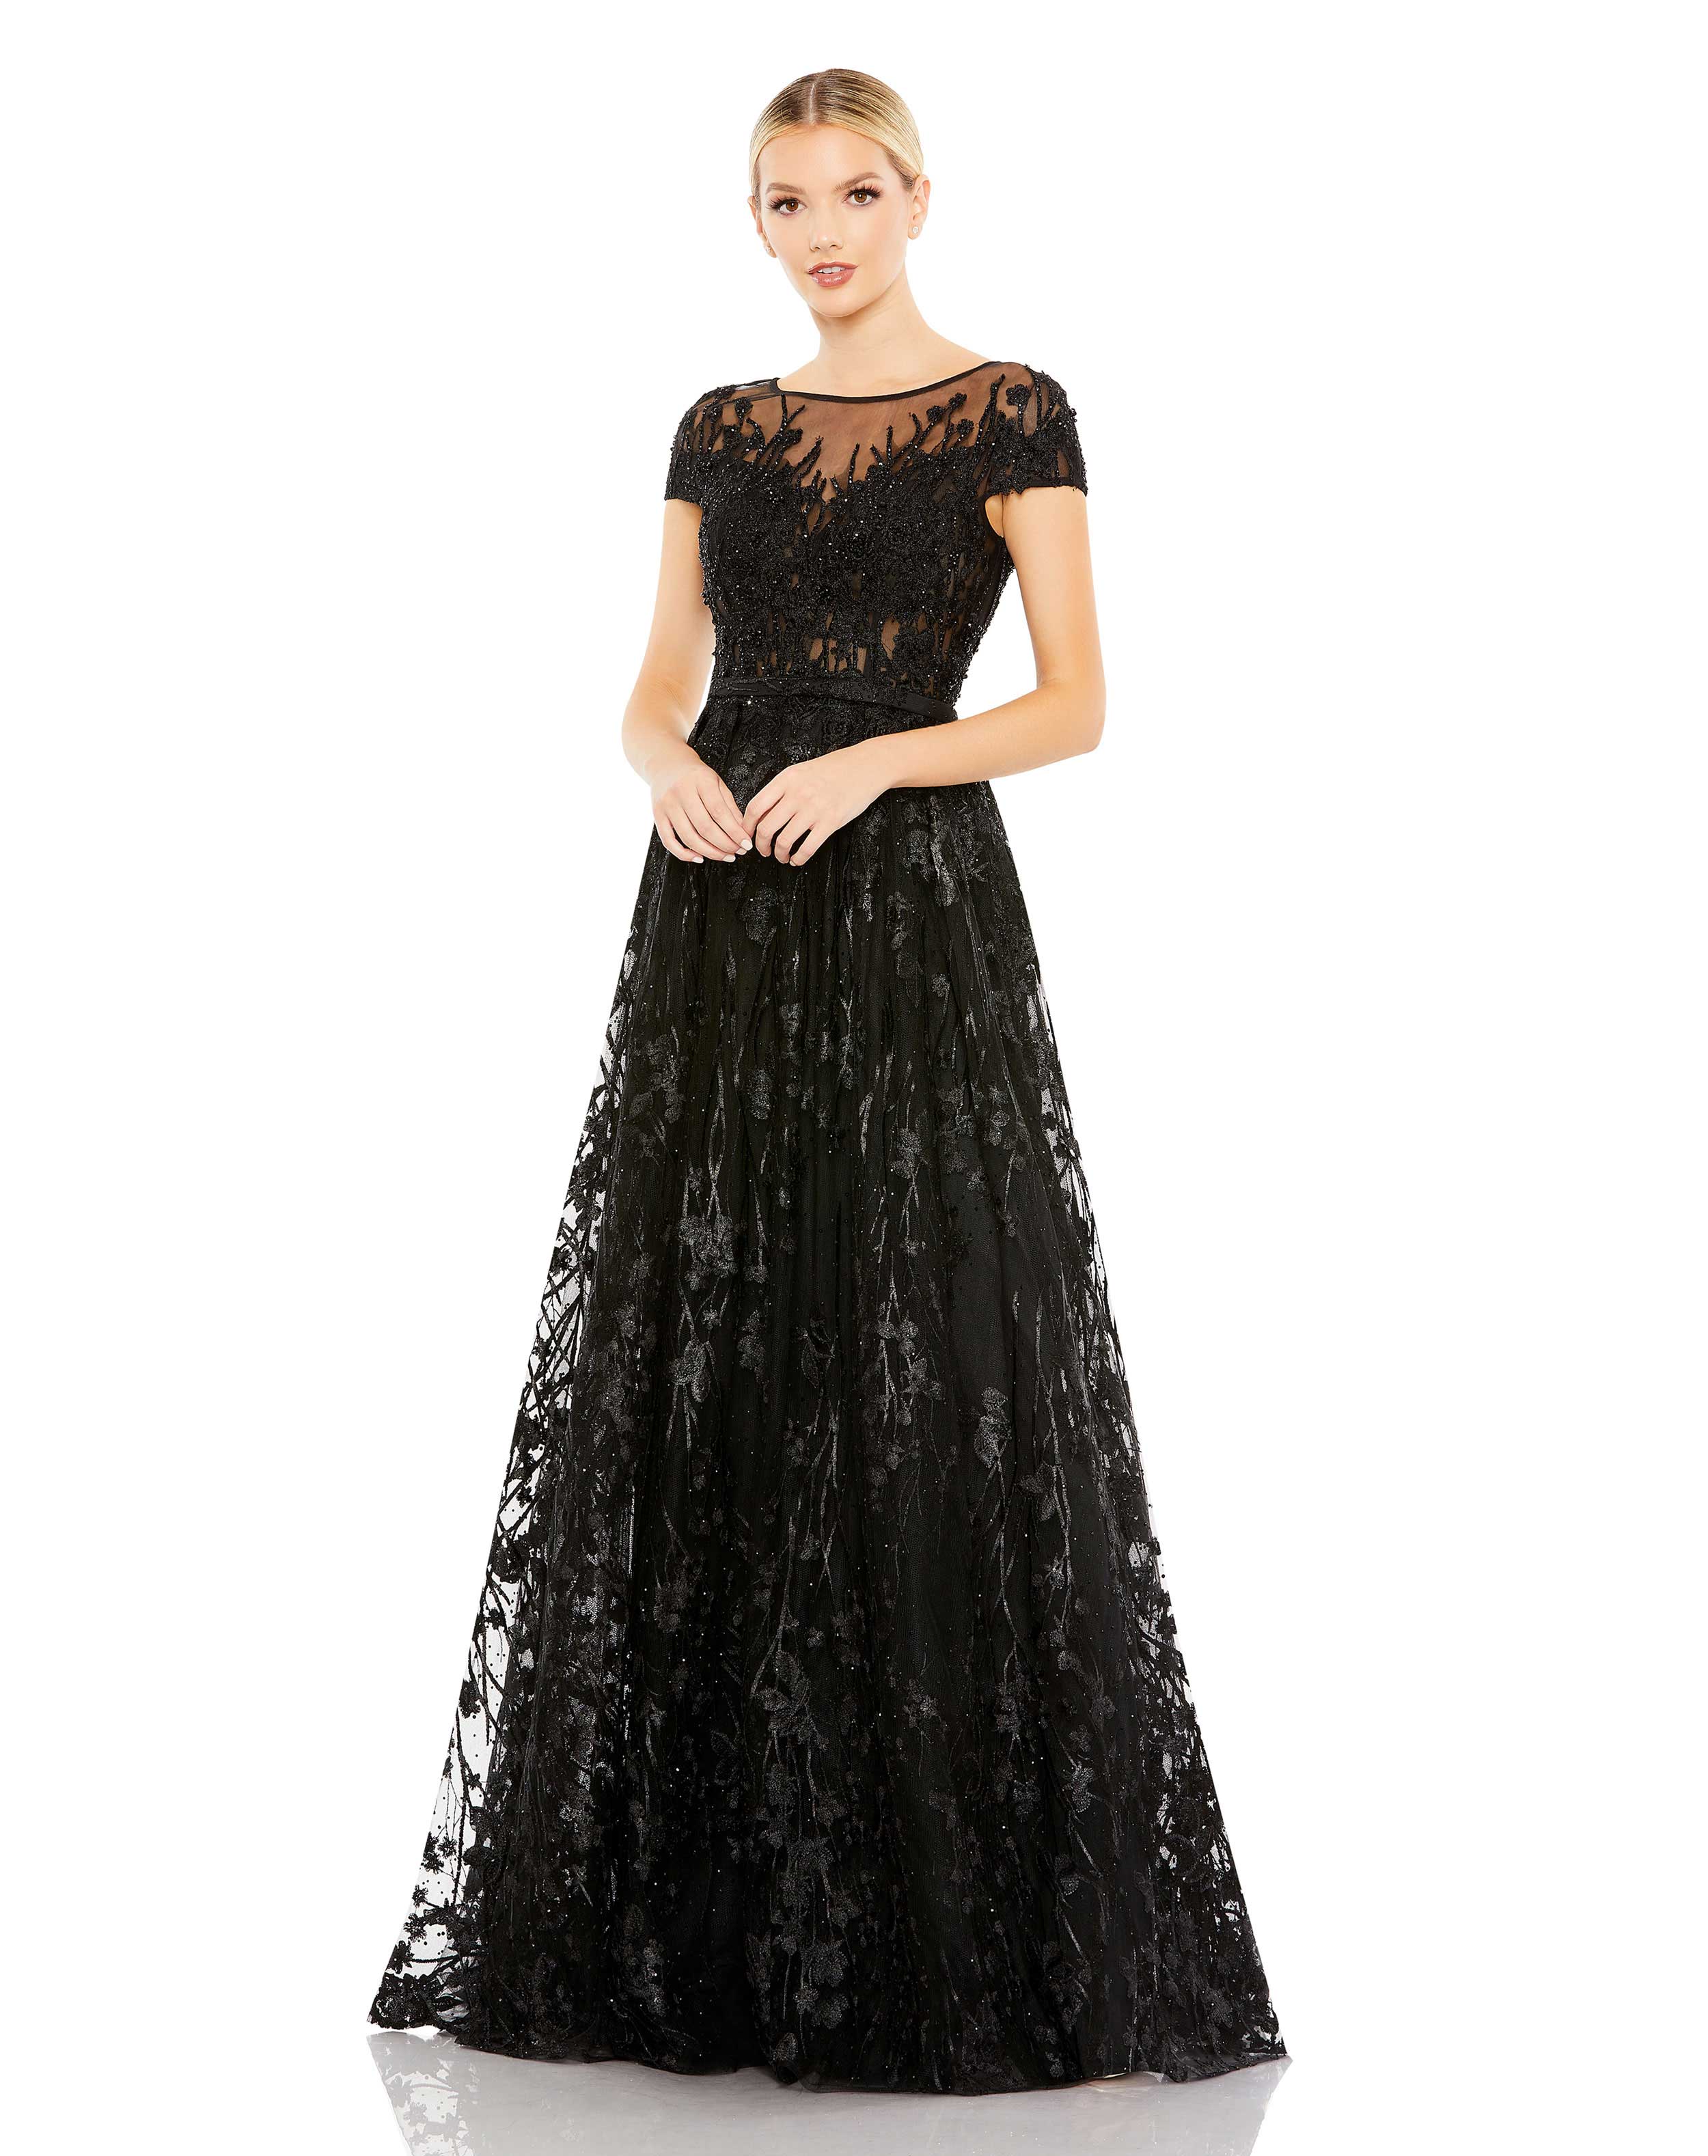 Embellished Floral Cap Sleeve A Line Gown